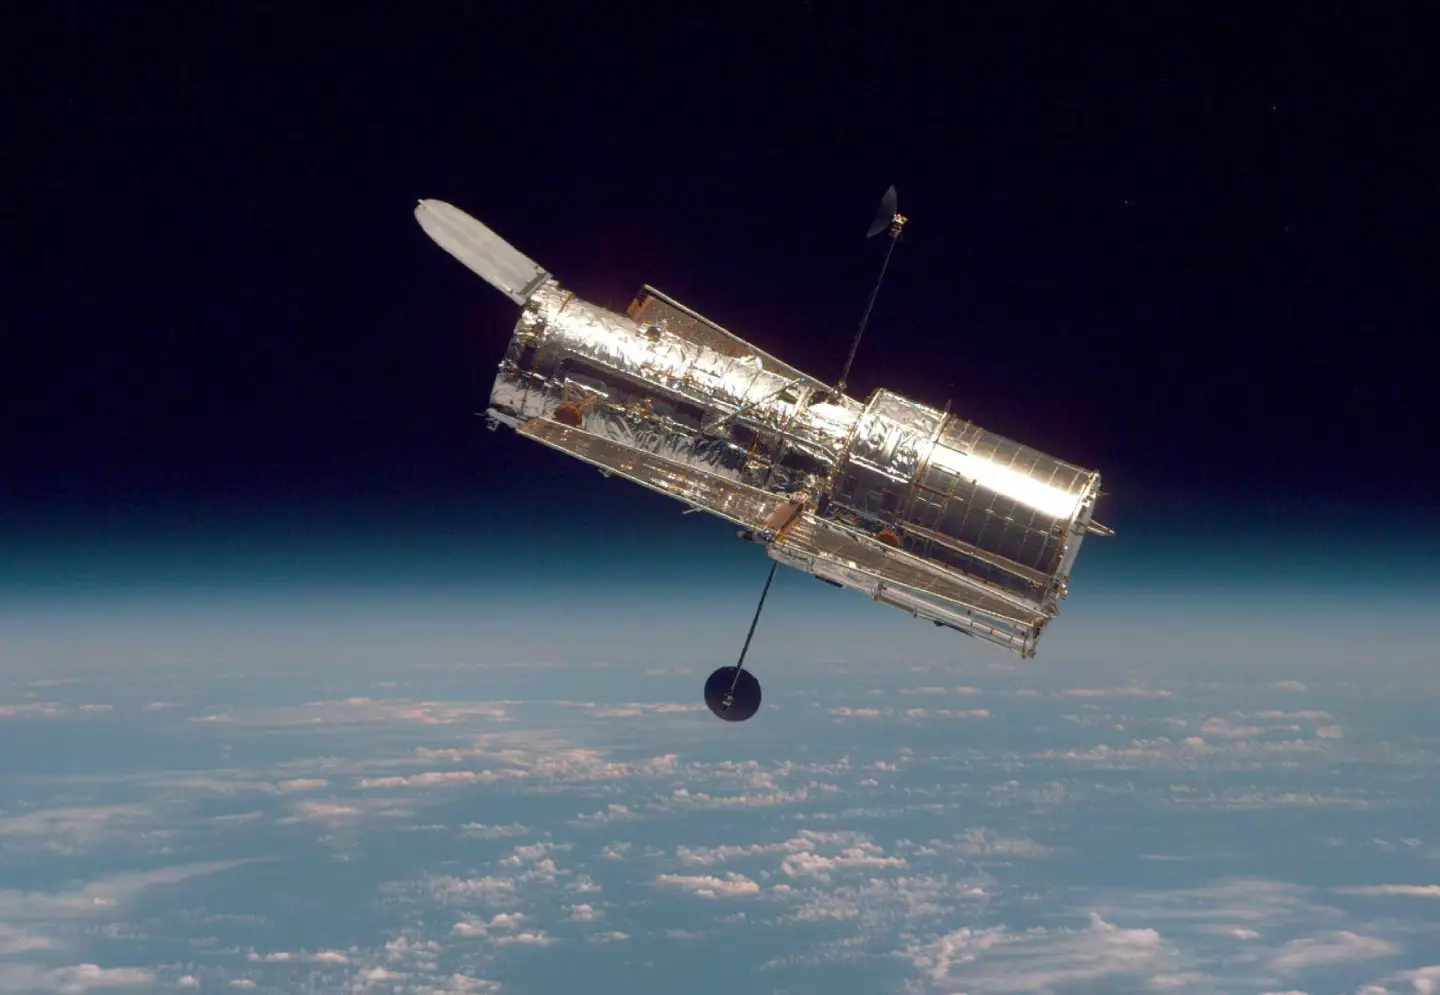 The Hubble telescope has been in space for 30 years.